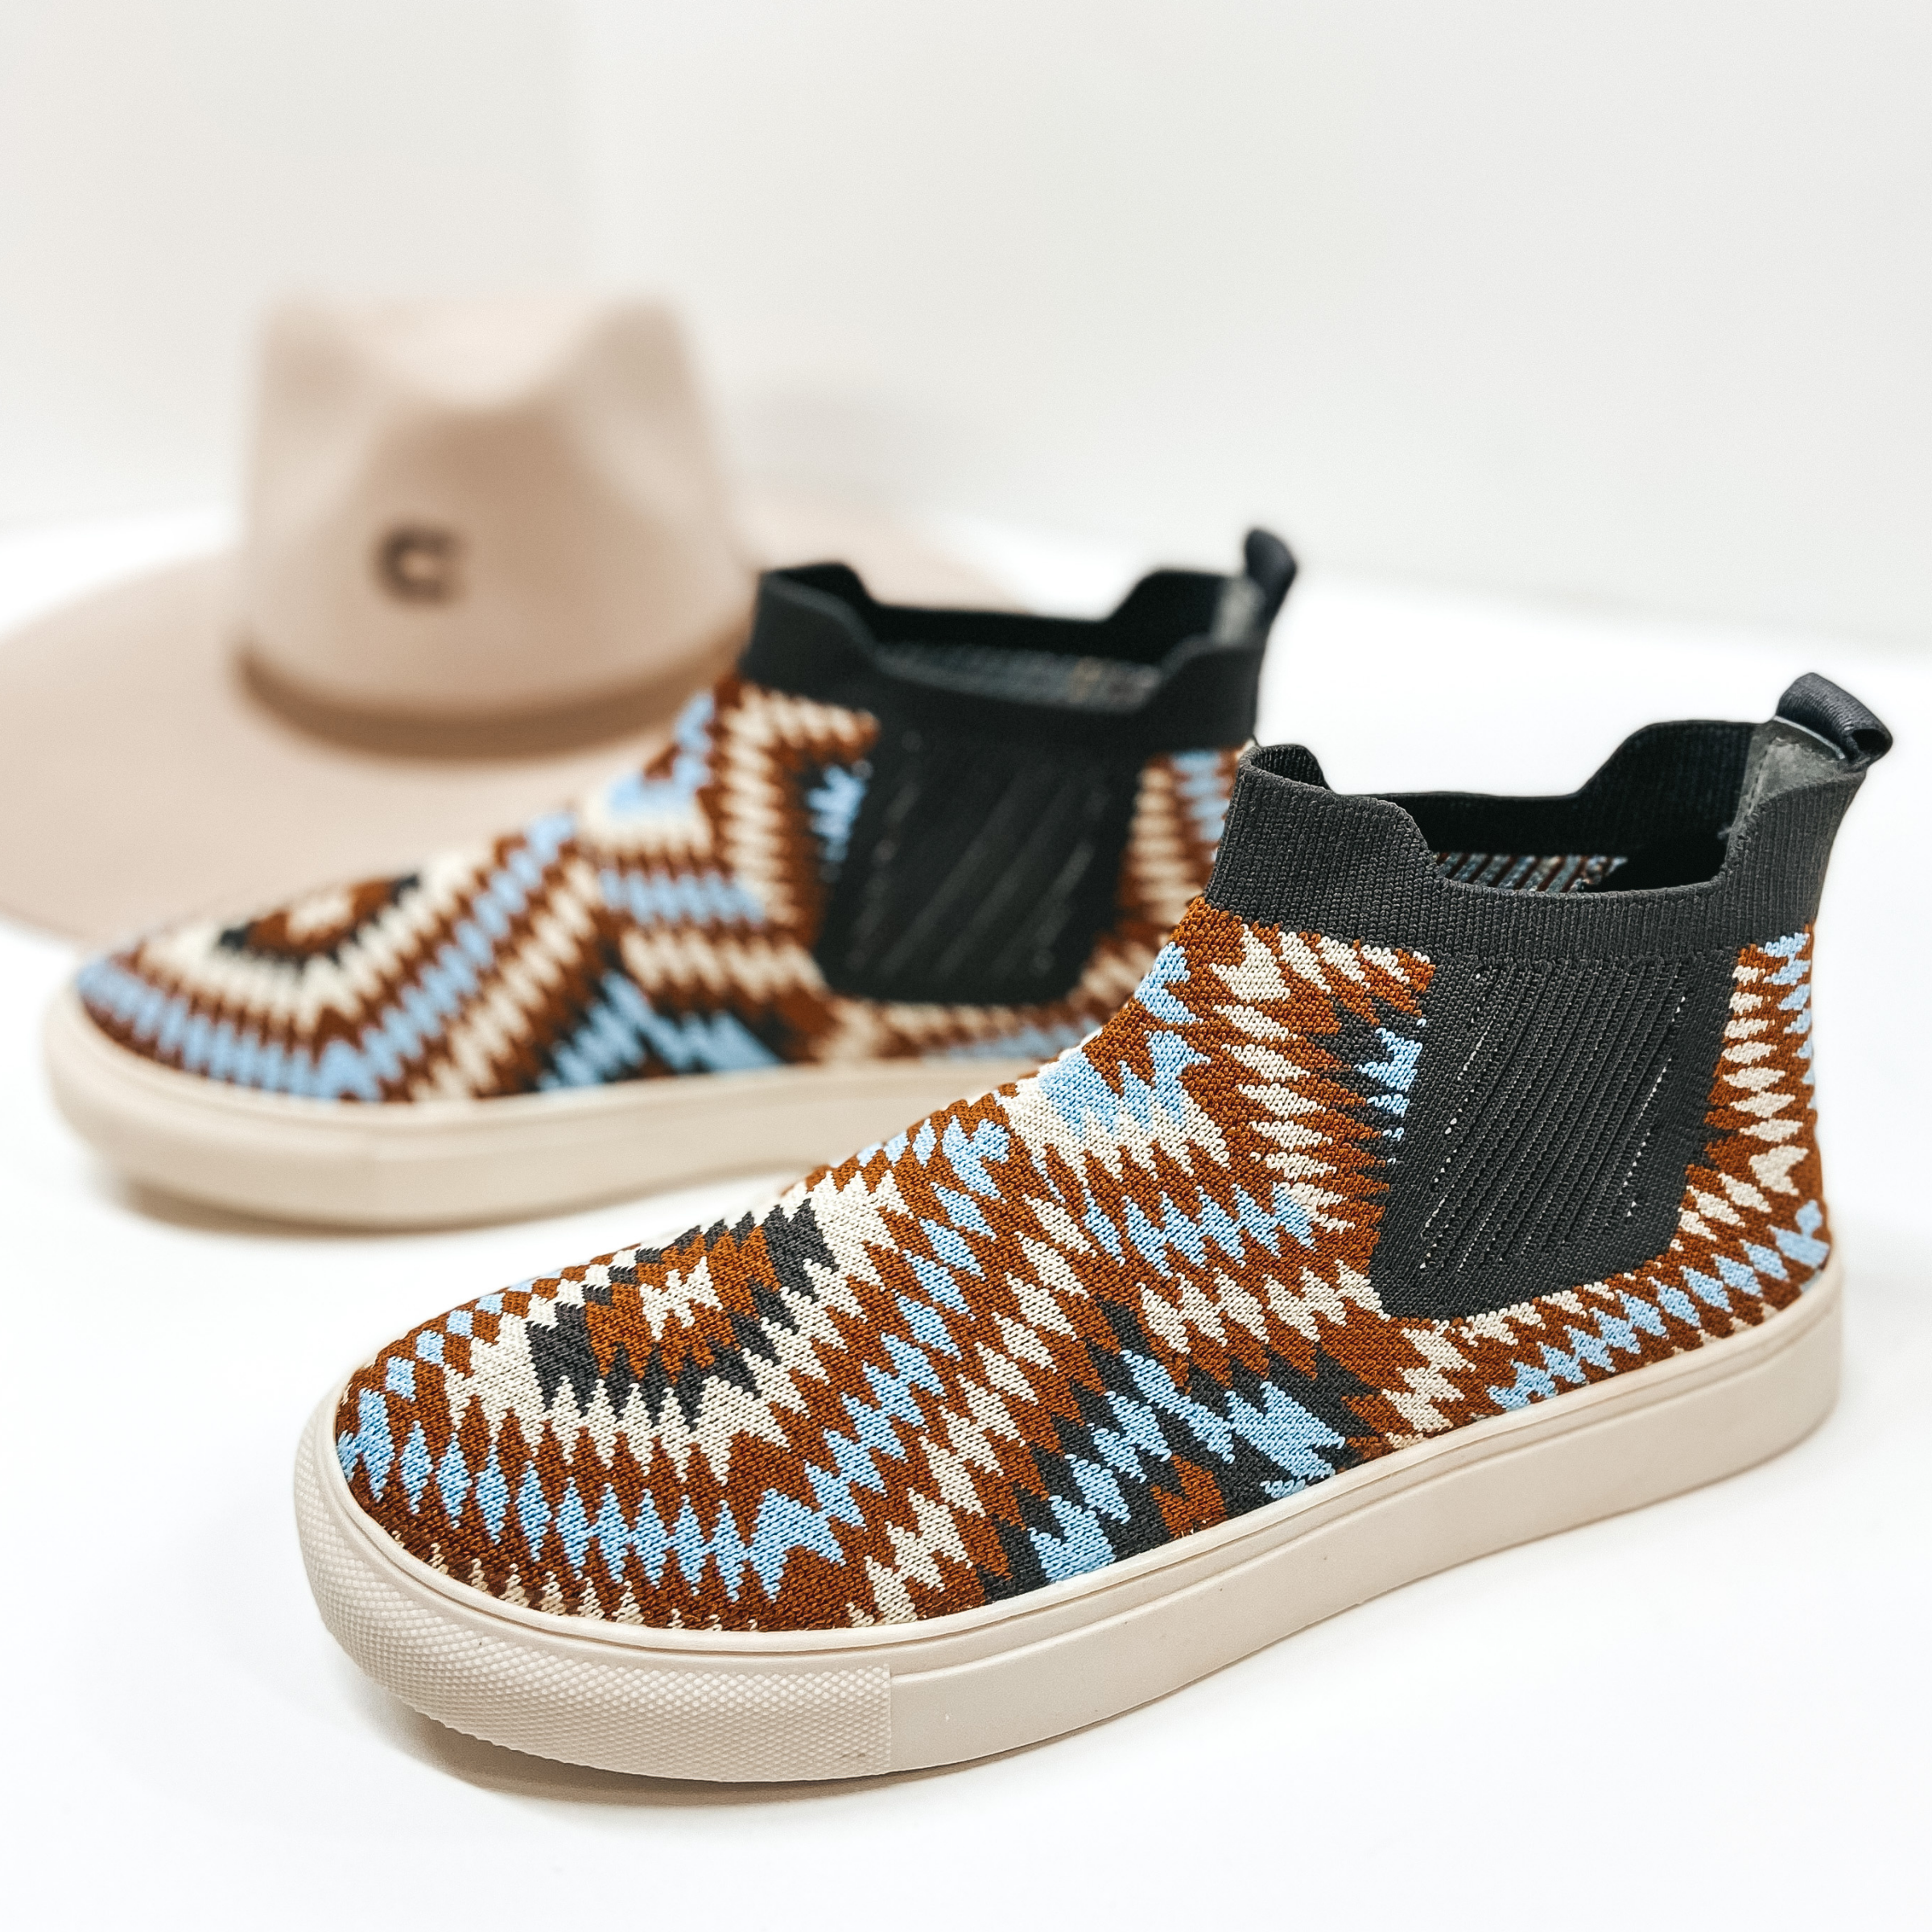 Knit high top sneakers that are a tan, grey, blue, and ivory tribal print, Pictured on white background with tan hat.